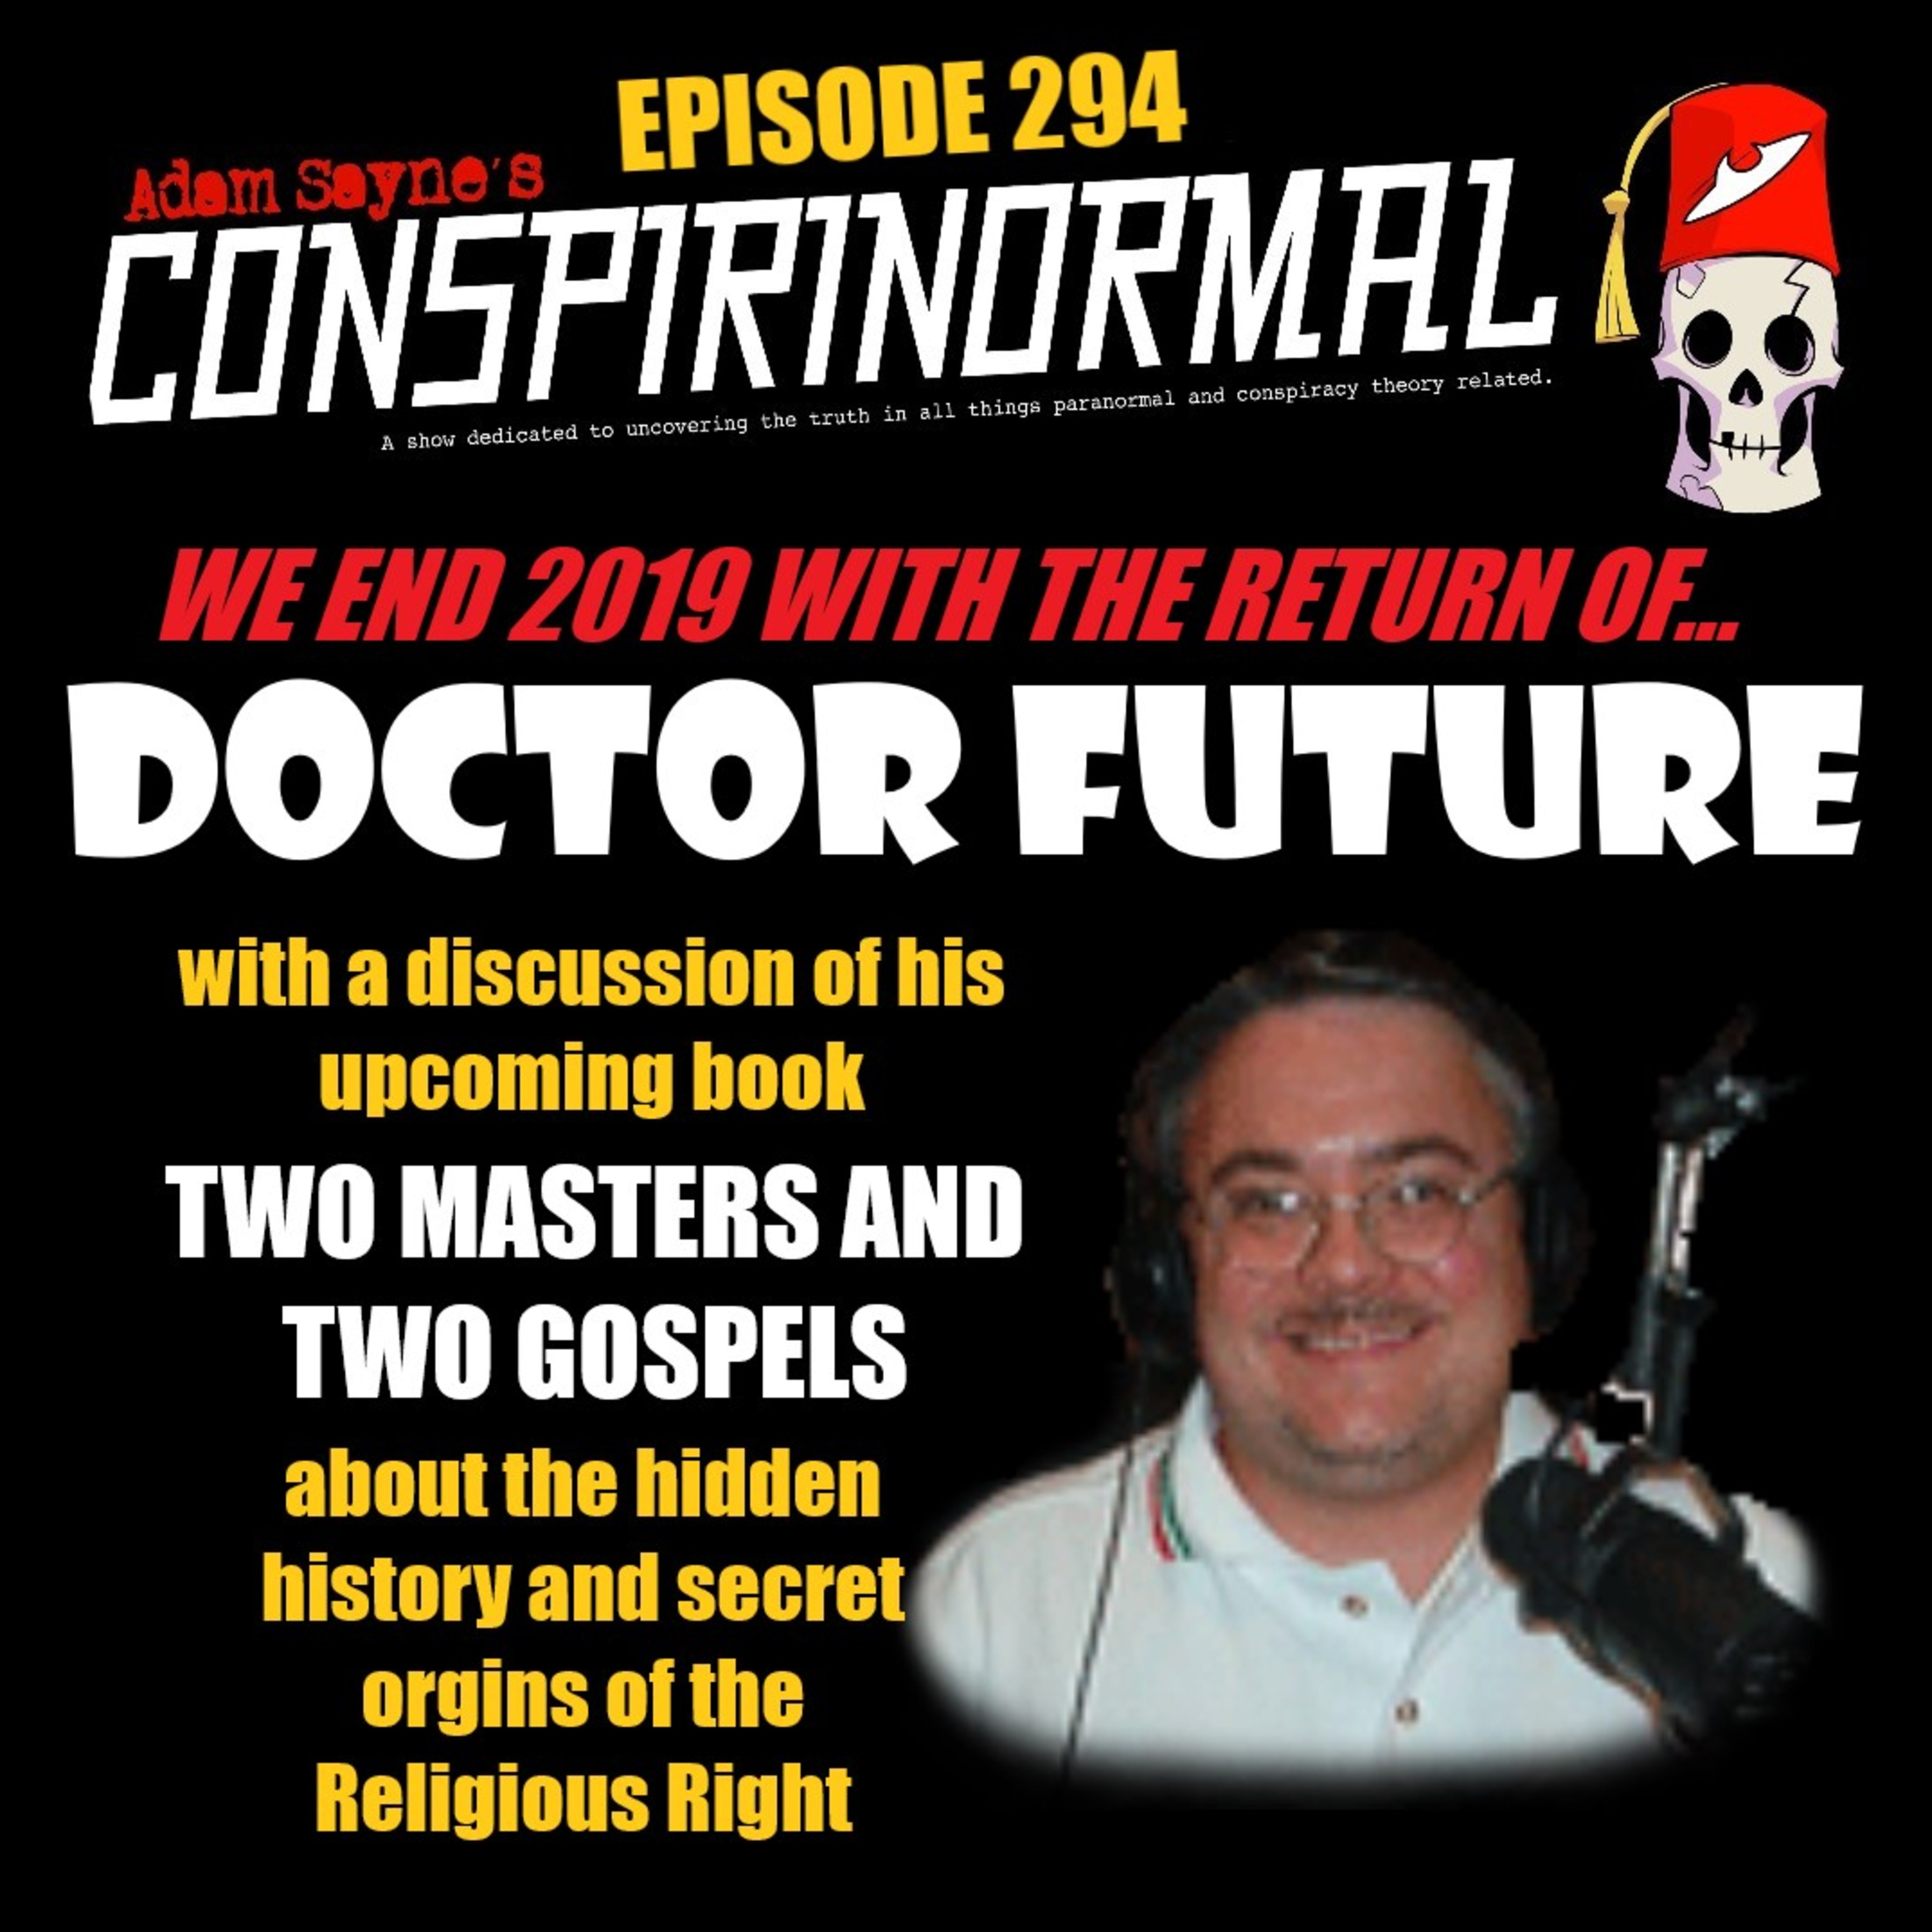 Conspirinormal Episode 294- Dr. Future 8 (Two Masters and Two Gospels Part 1)